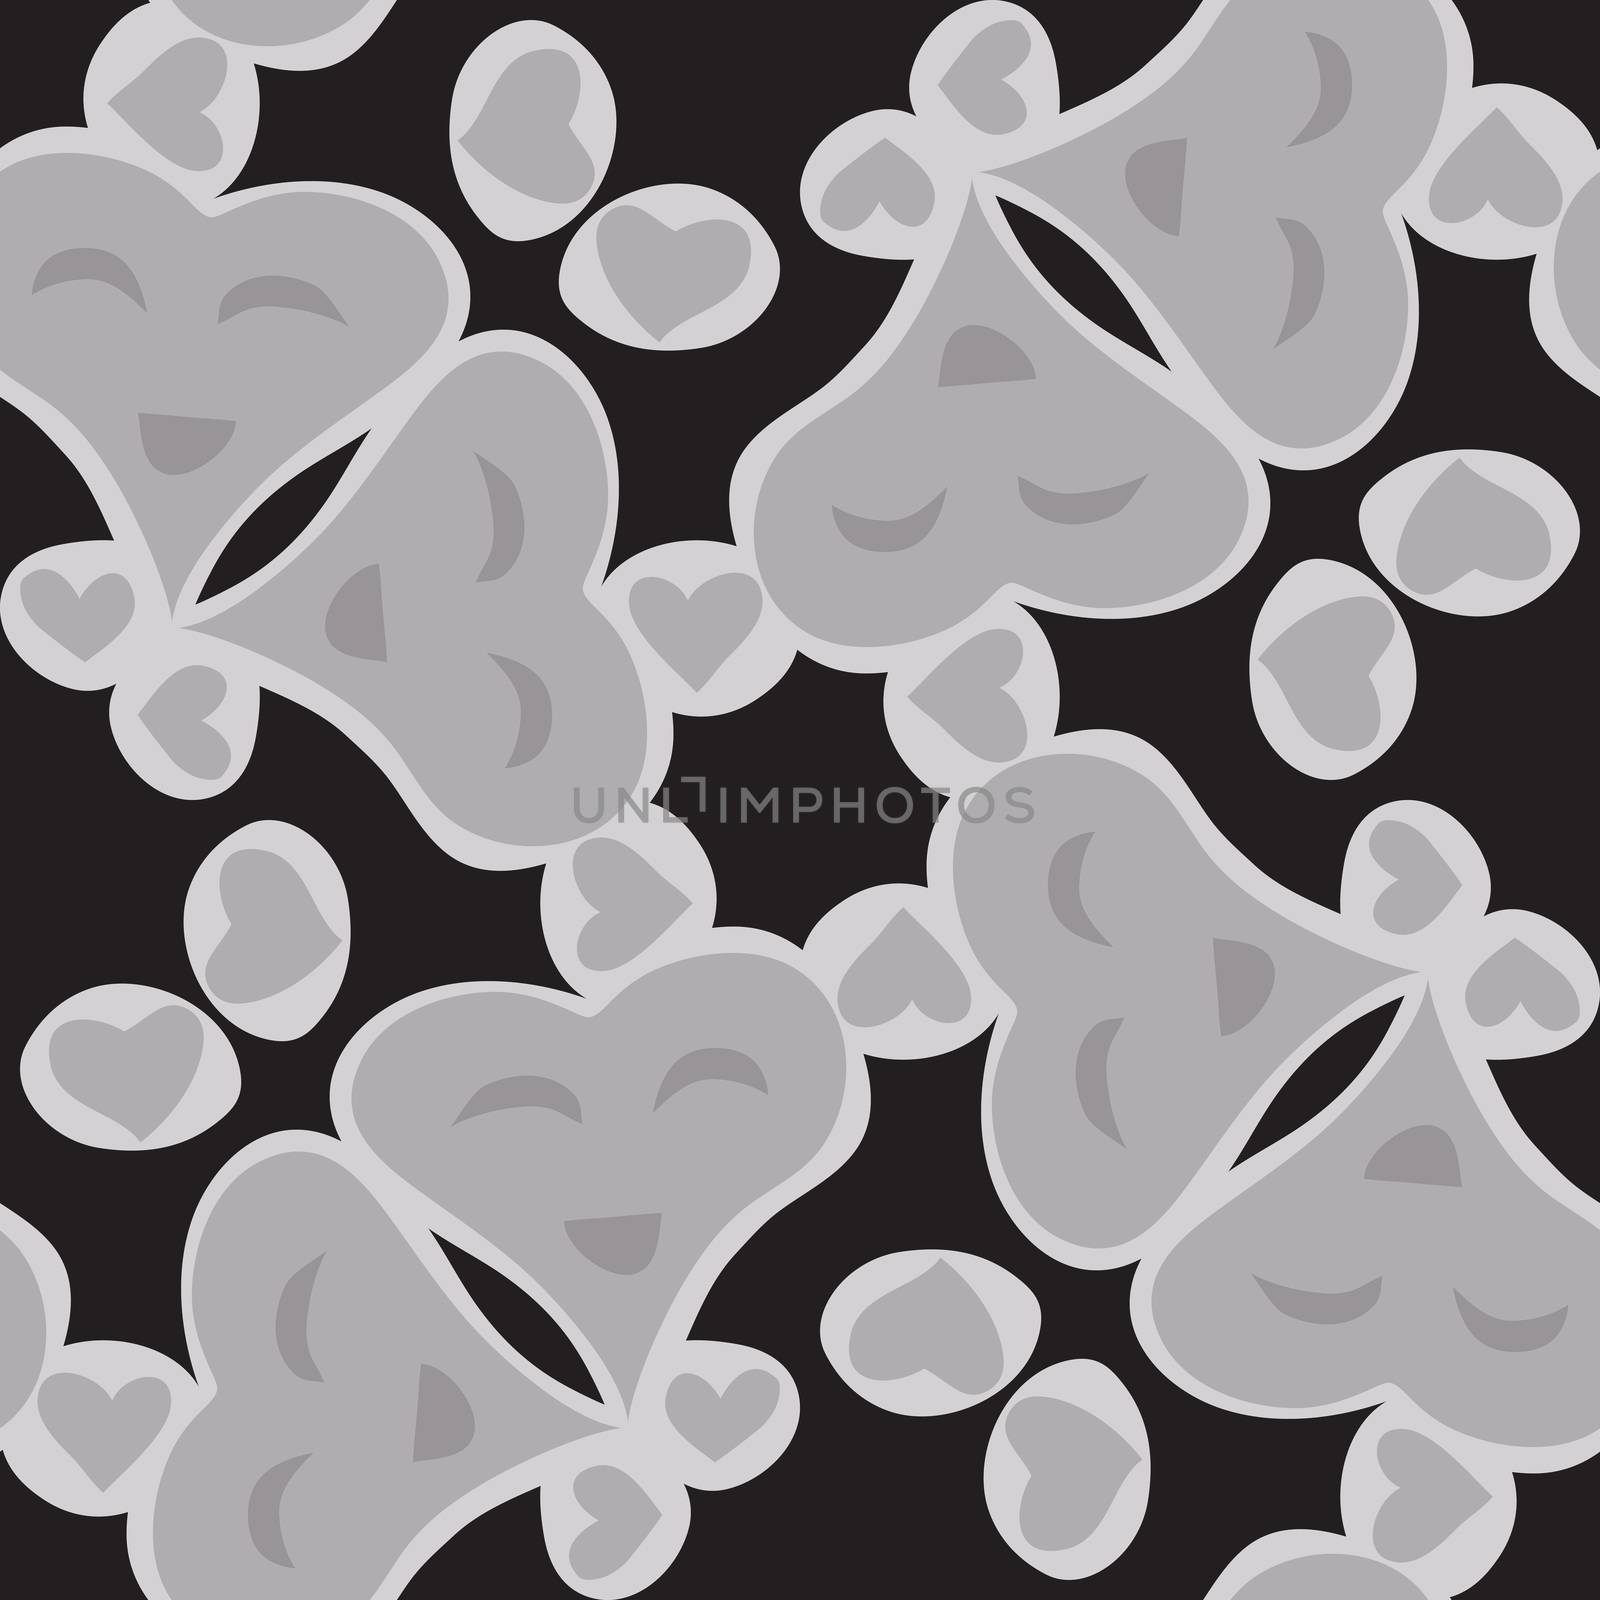 Tiled pattern of seamless valentine heart shapes with black background